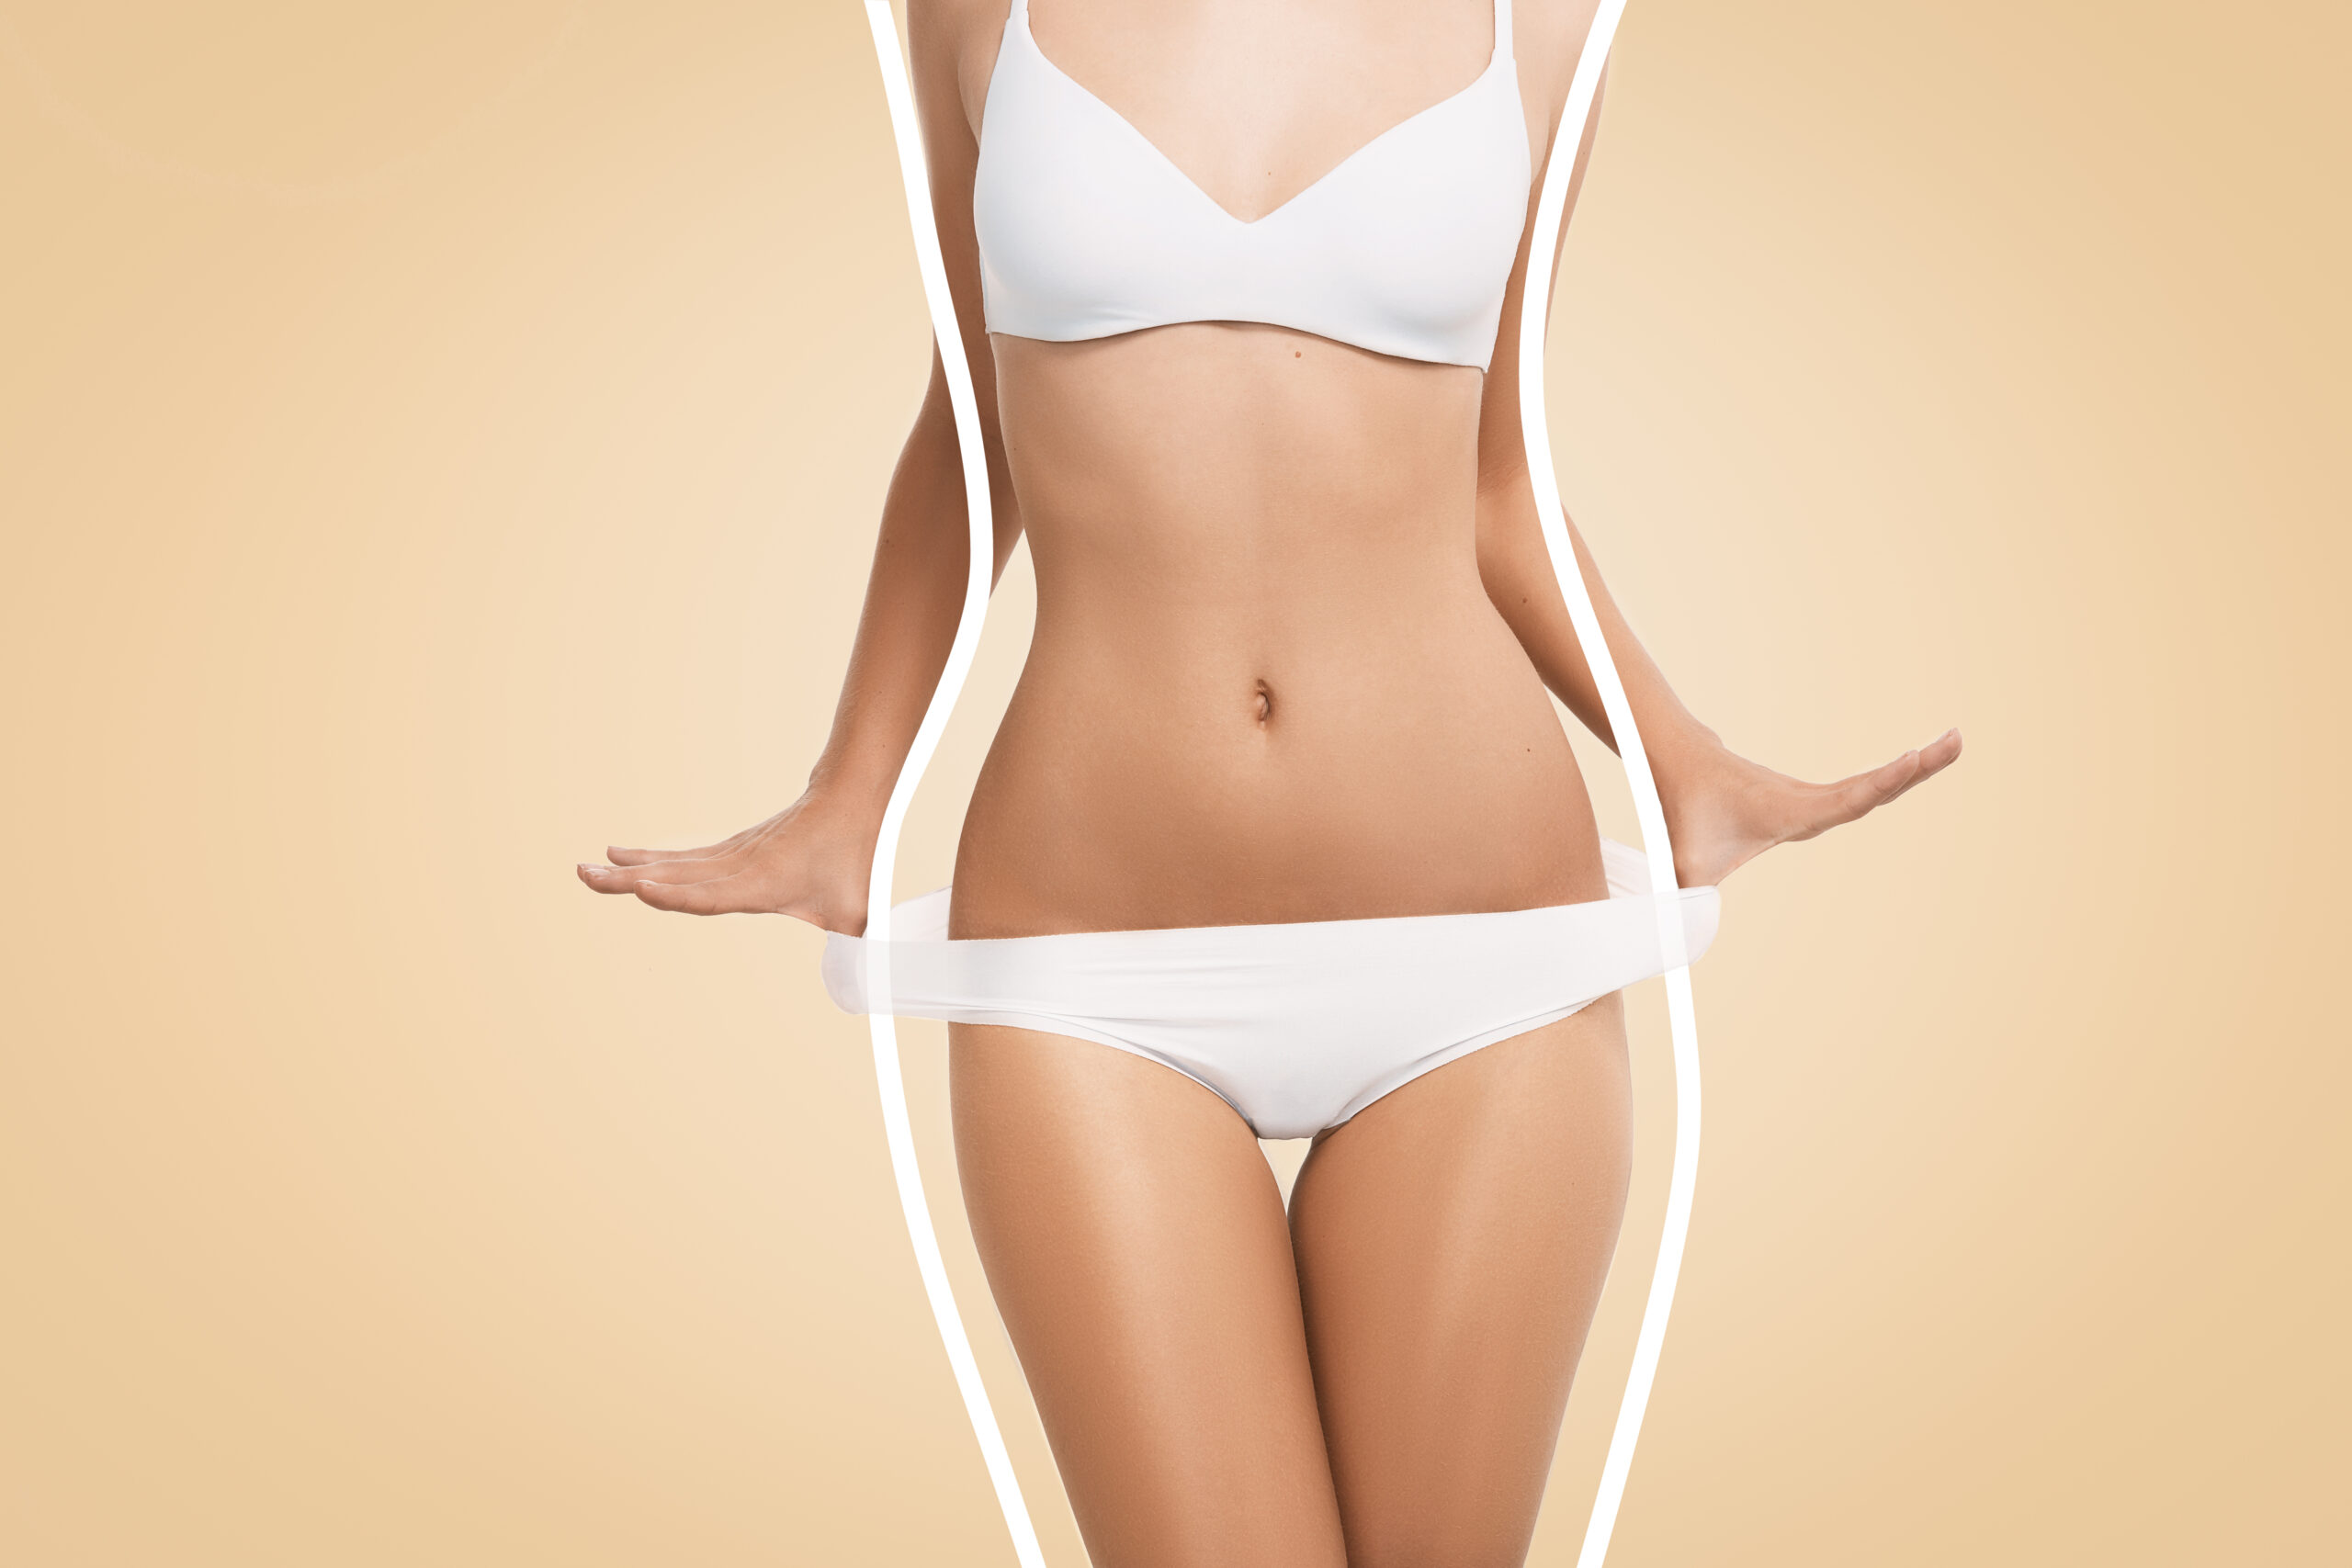 How Much Weight Can You Lose from a Tummy Tuck?